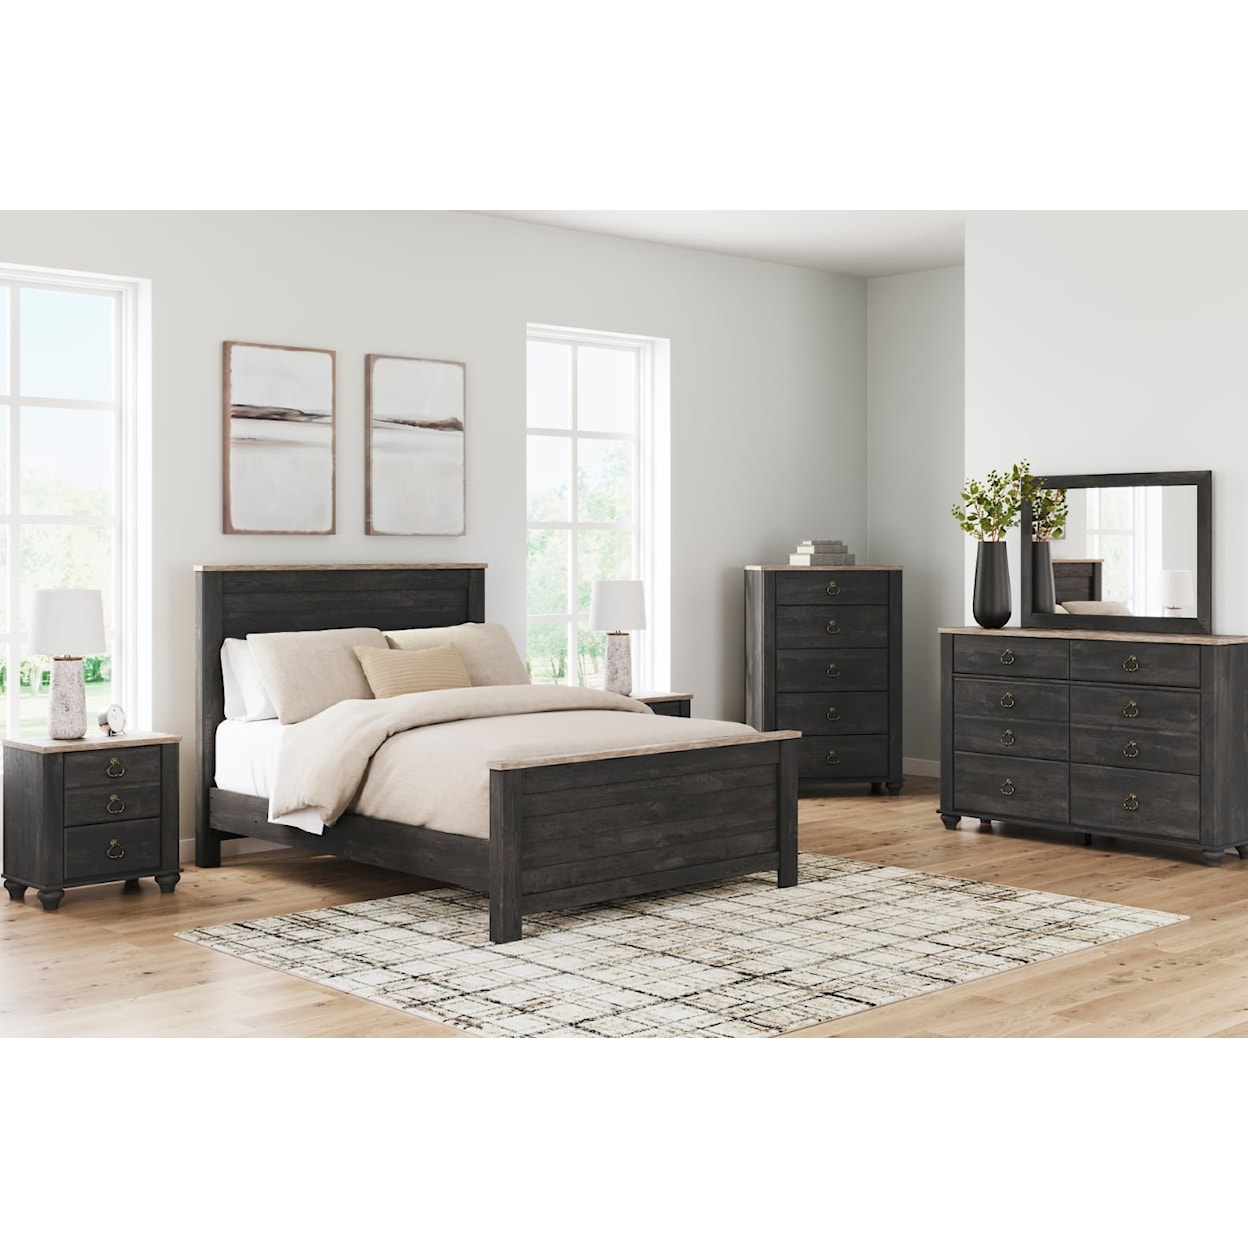 Signature Design by Ashley Nanforth Queen Bedroom Set